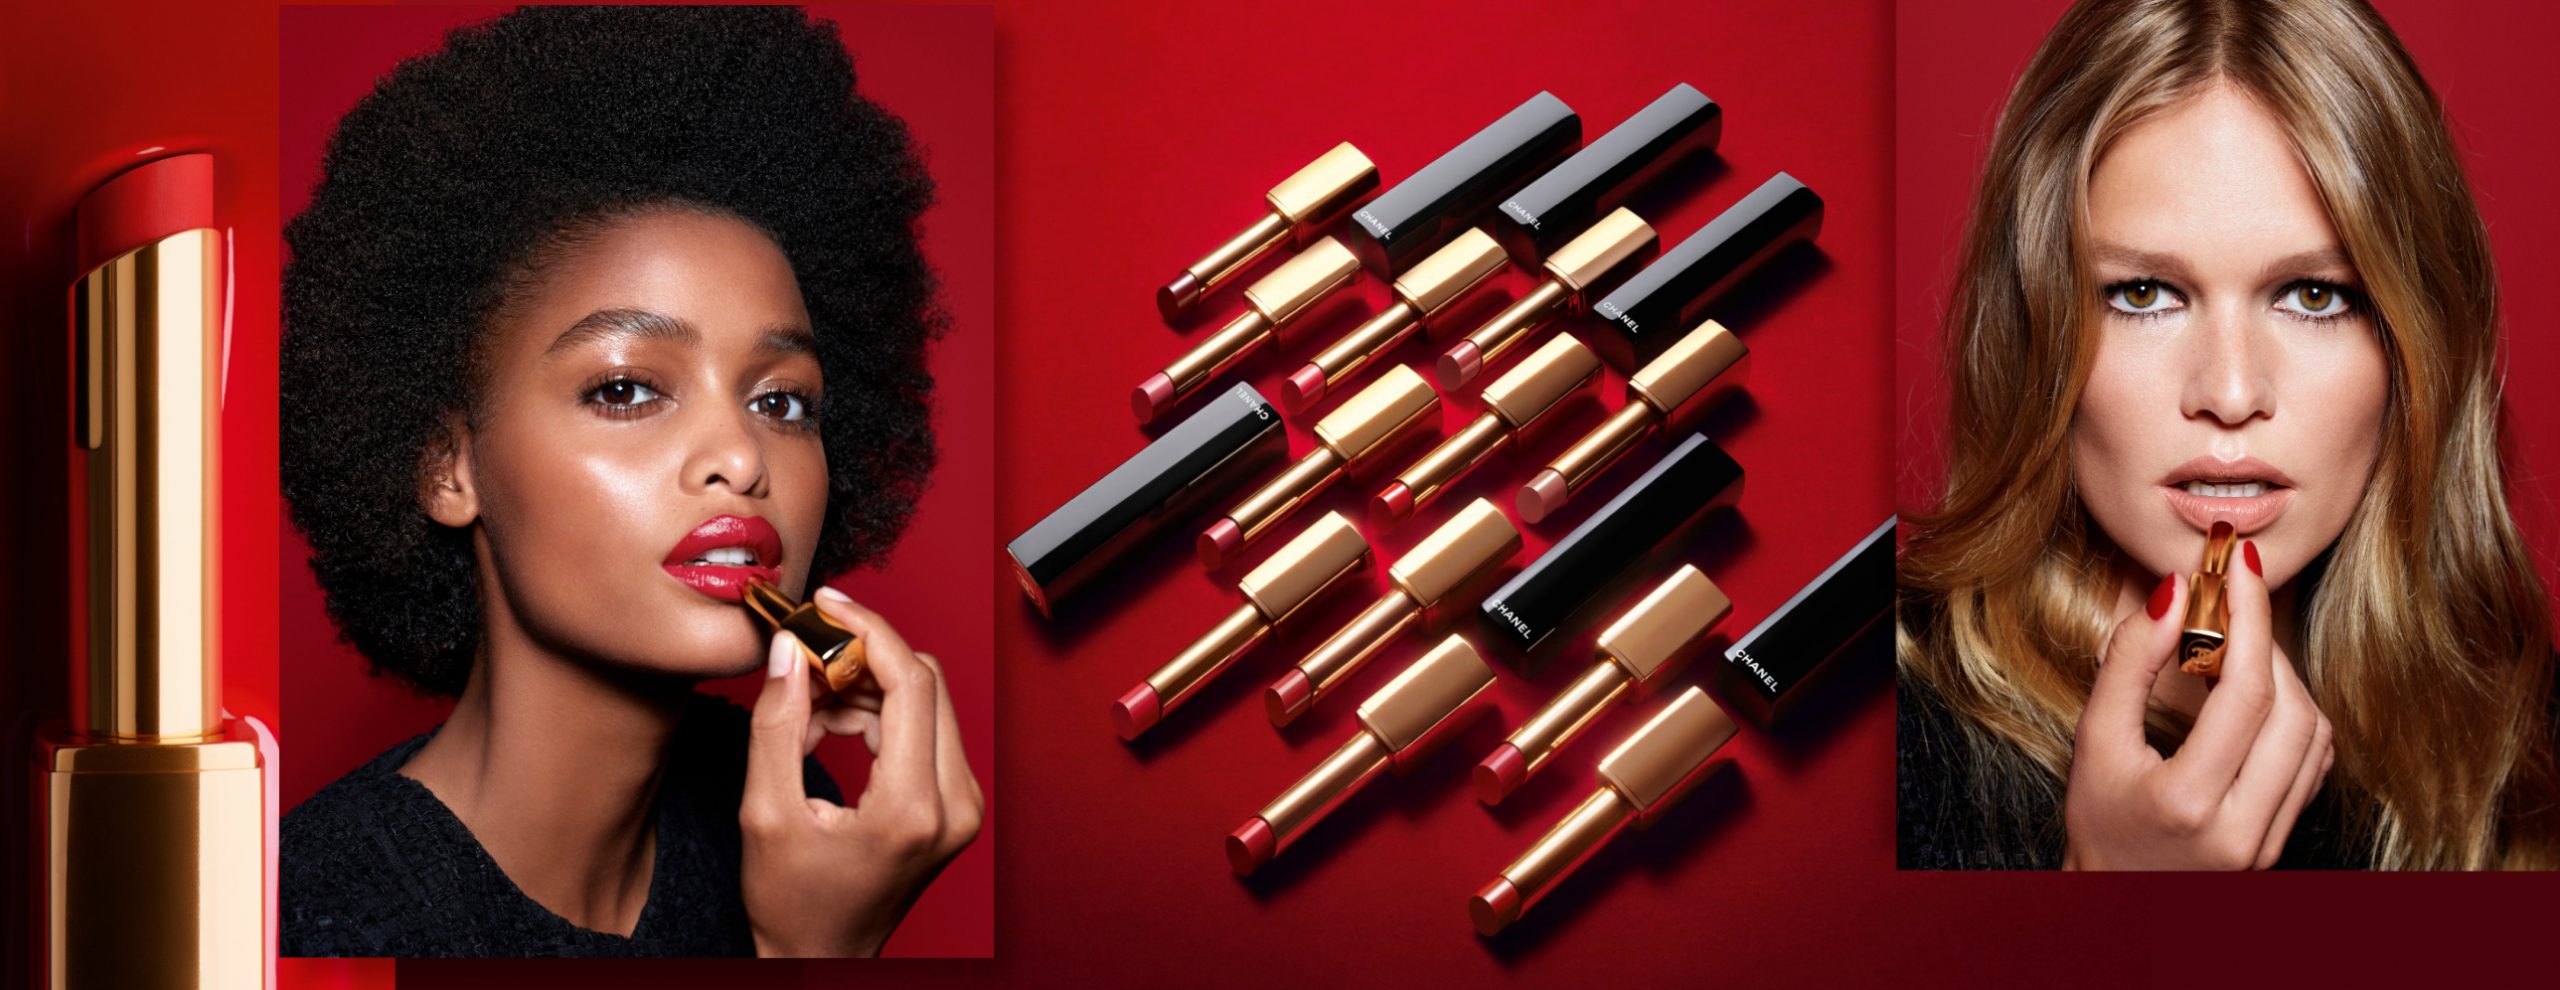 The CHANEL Rouge Allure L'Extrait Is A New High-Intensity, Refillable  Lipstick With A Satin Finish